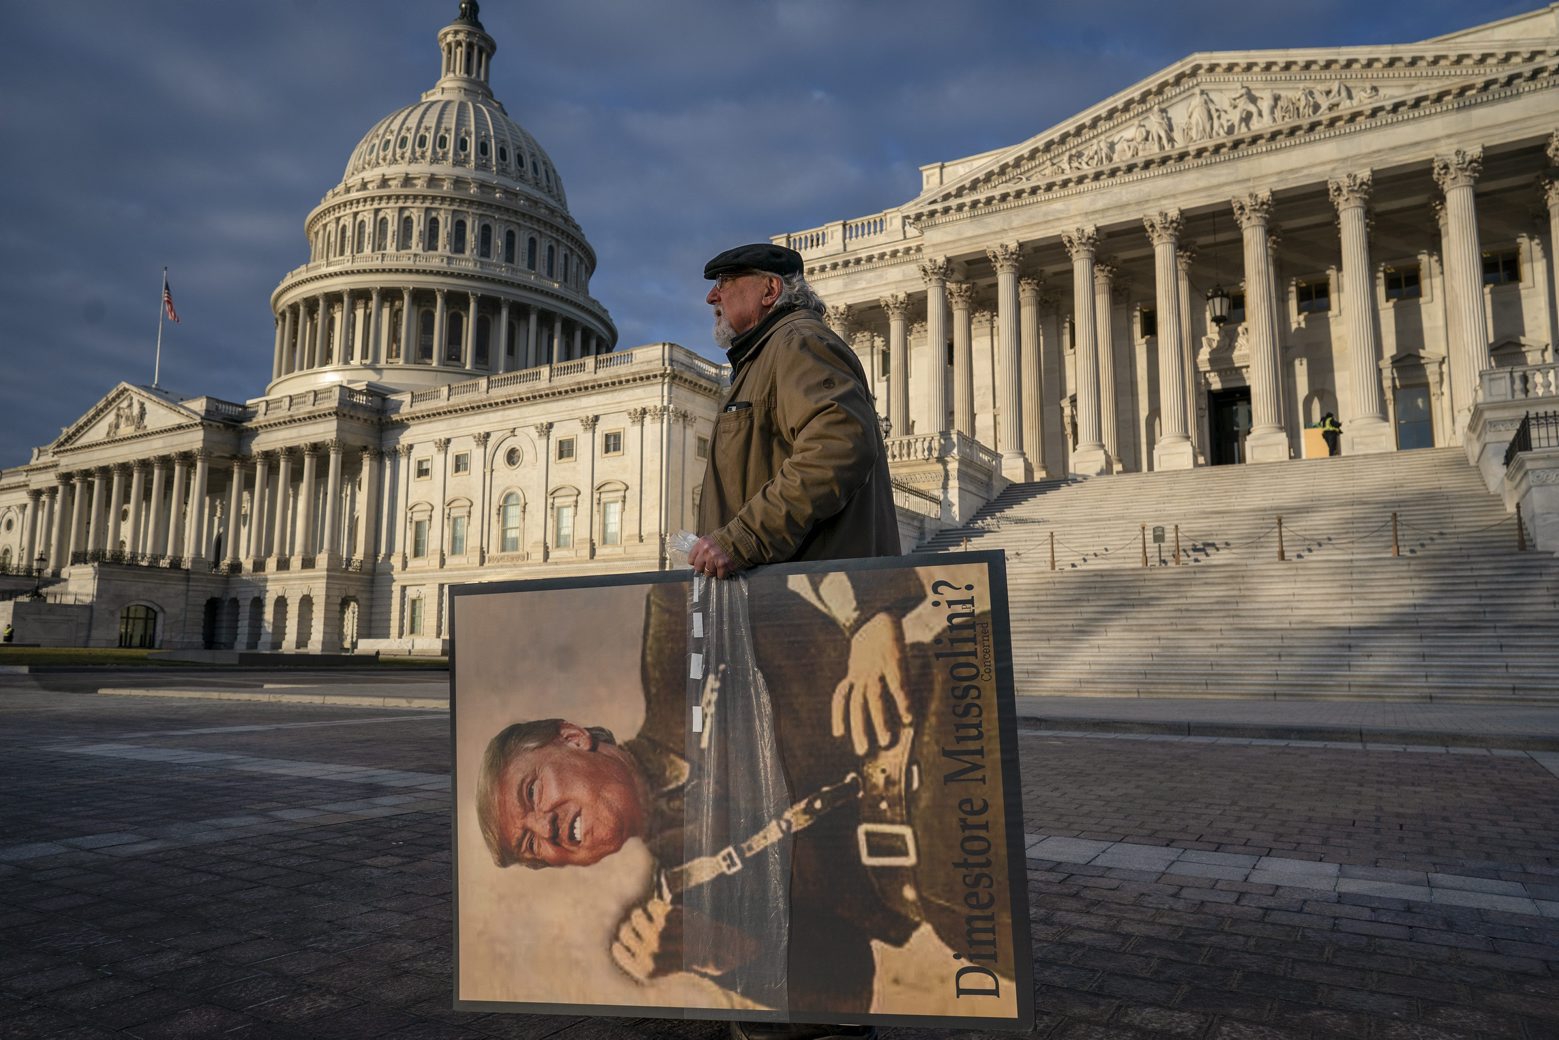 Anti-Trump activist Stephen Parlato of Boulder, Colo., arrives at the Capitol in Washington, early Friday, Jan. 31, 2020, as the Senate resumes the impeachment trial of President Donald Trump on charges of abuse of power and obstruction of Congress. Parlato has taken his message to Congress since the start of the impeachment hearings. (AP Photo/J. Scott Applewhite)
Stephen Parlato Trump Impeachment